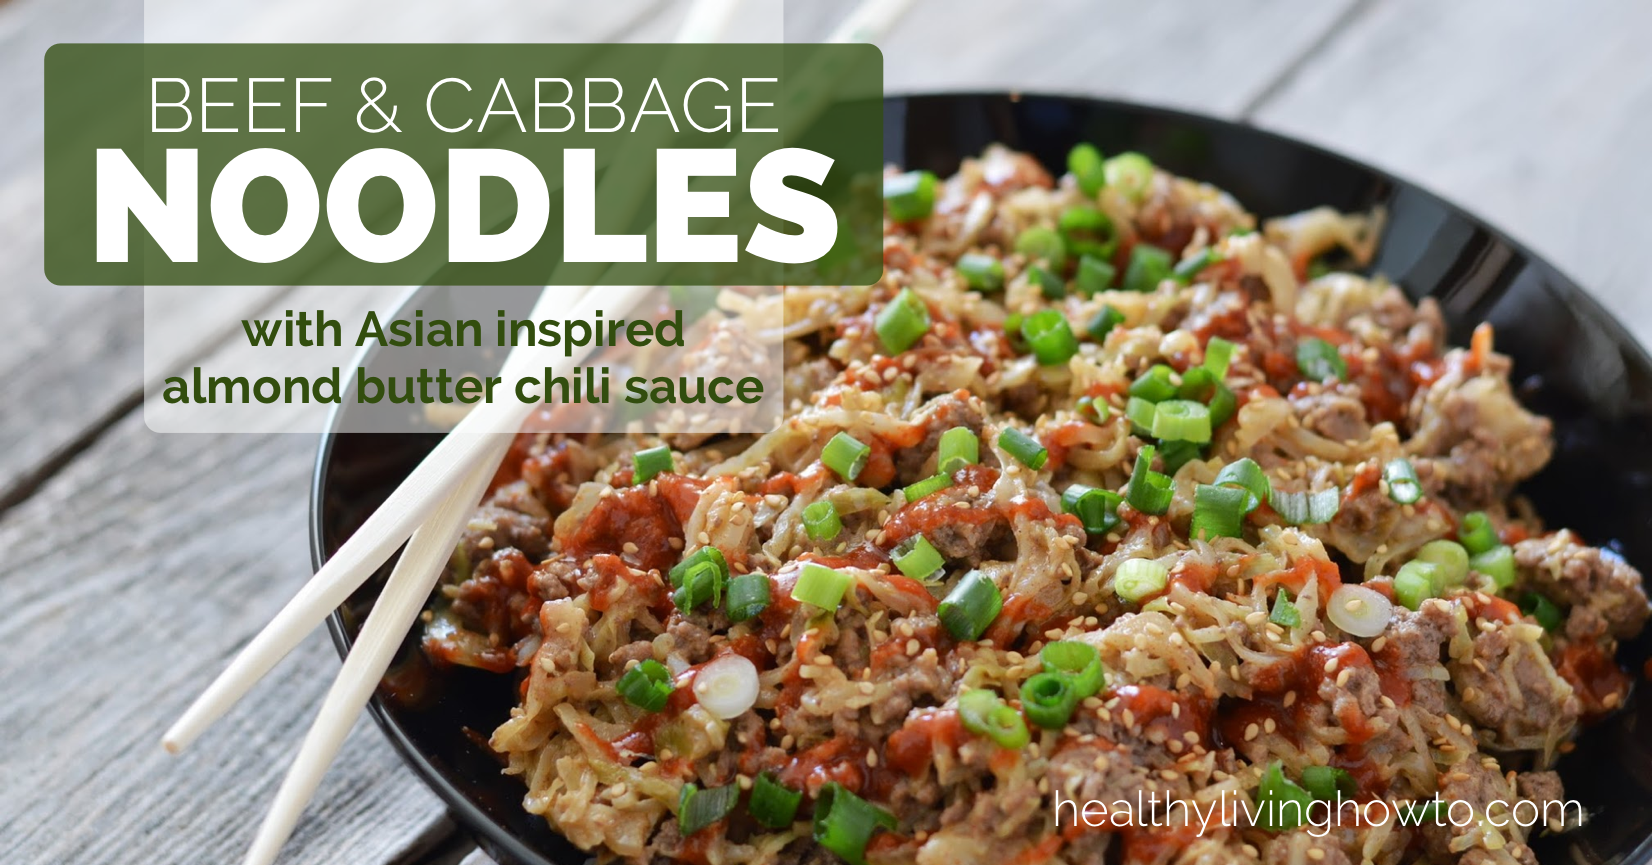 Beef & Cabbage Noodles With Asian Inspired Almond Butter Chili Sauce | healthylivinghowto.com